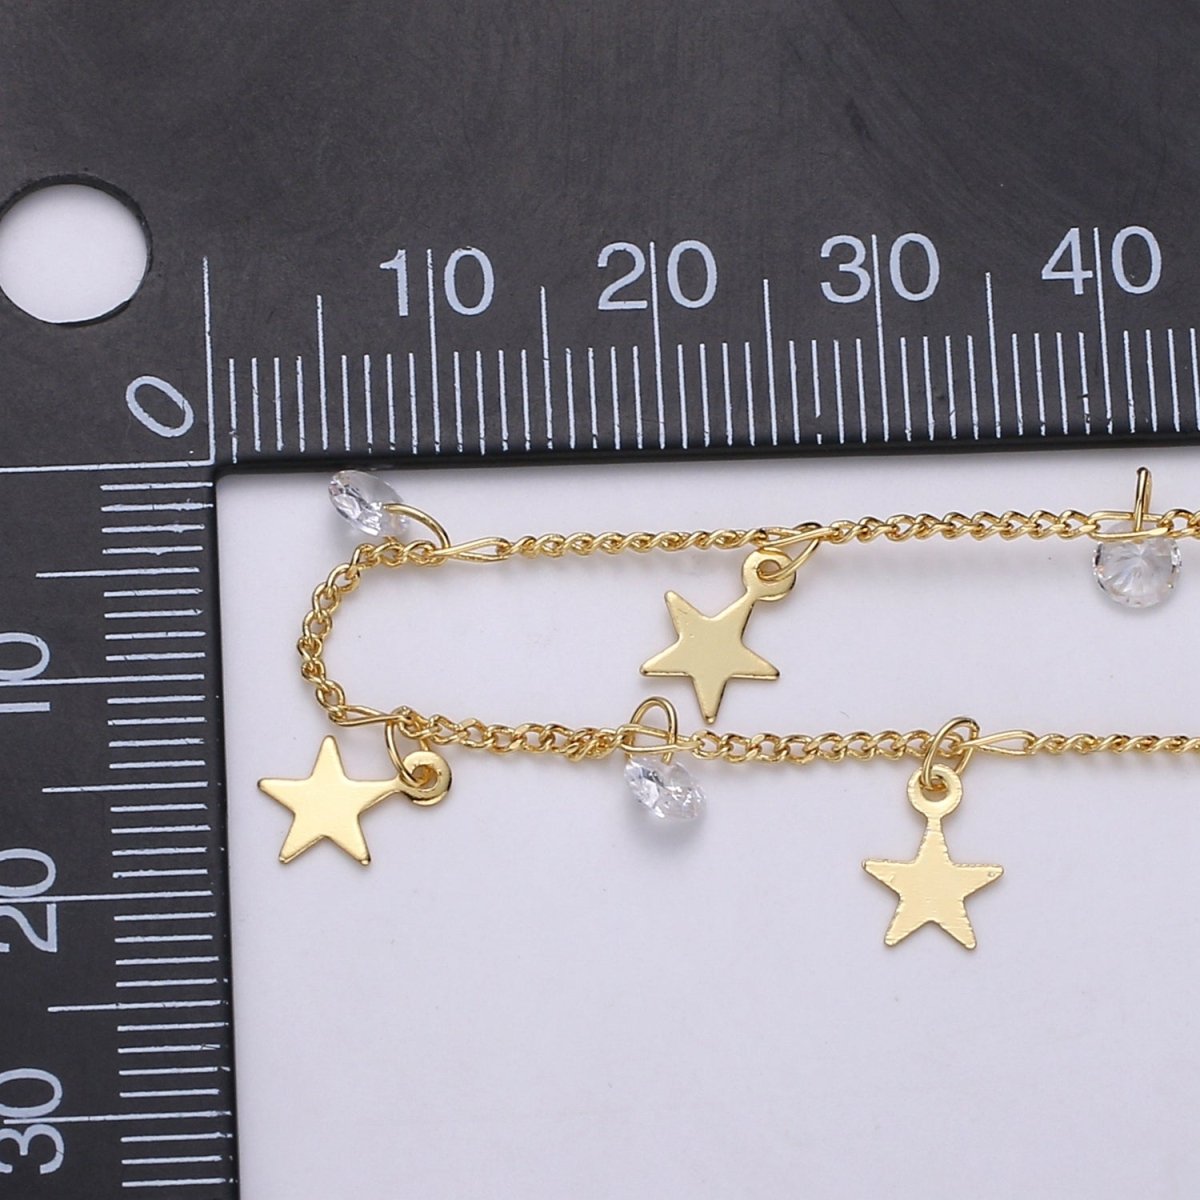 24K Gold Filled Curb Twisted Chain By Yard, Star CZ Charm Twisted Linked Chain by Yard, Designed Curb Unfinished Chain For Jewelry Making | ROLL-325 Clearance Pricing - DLUXCA